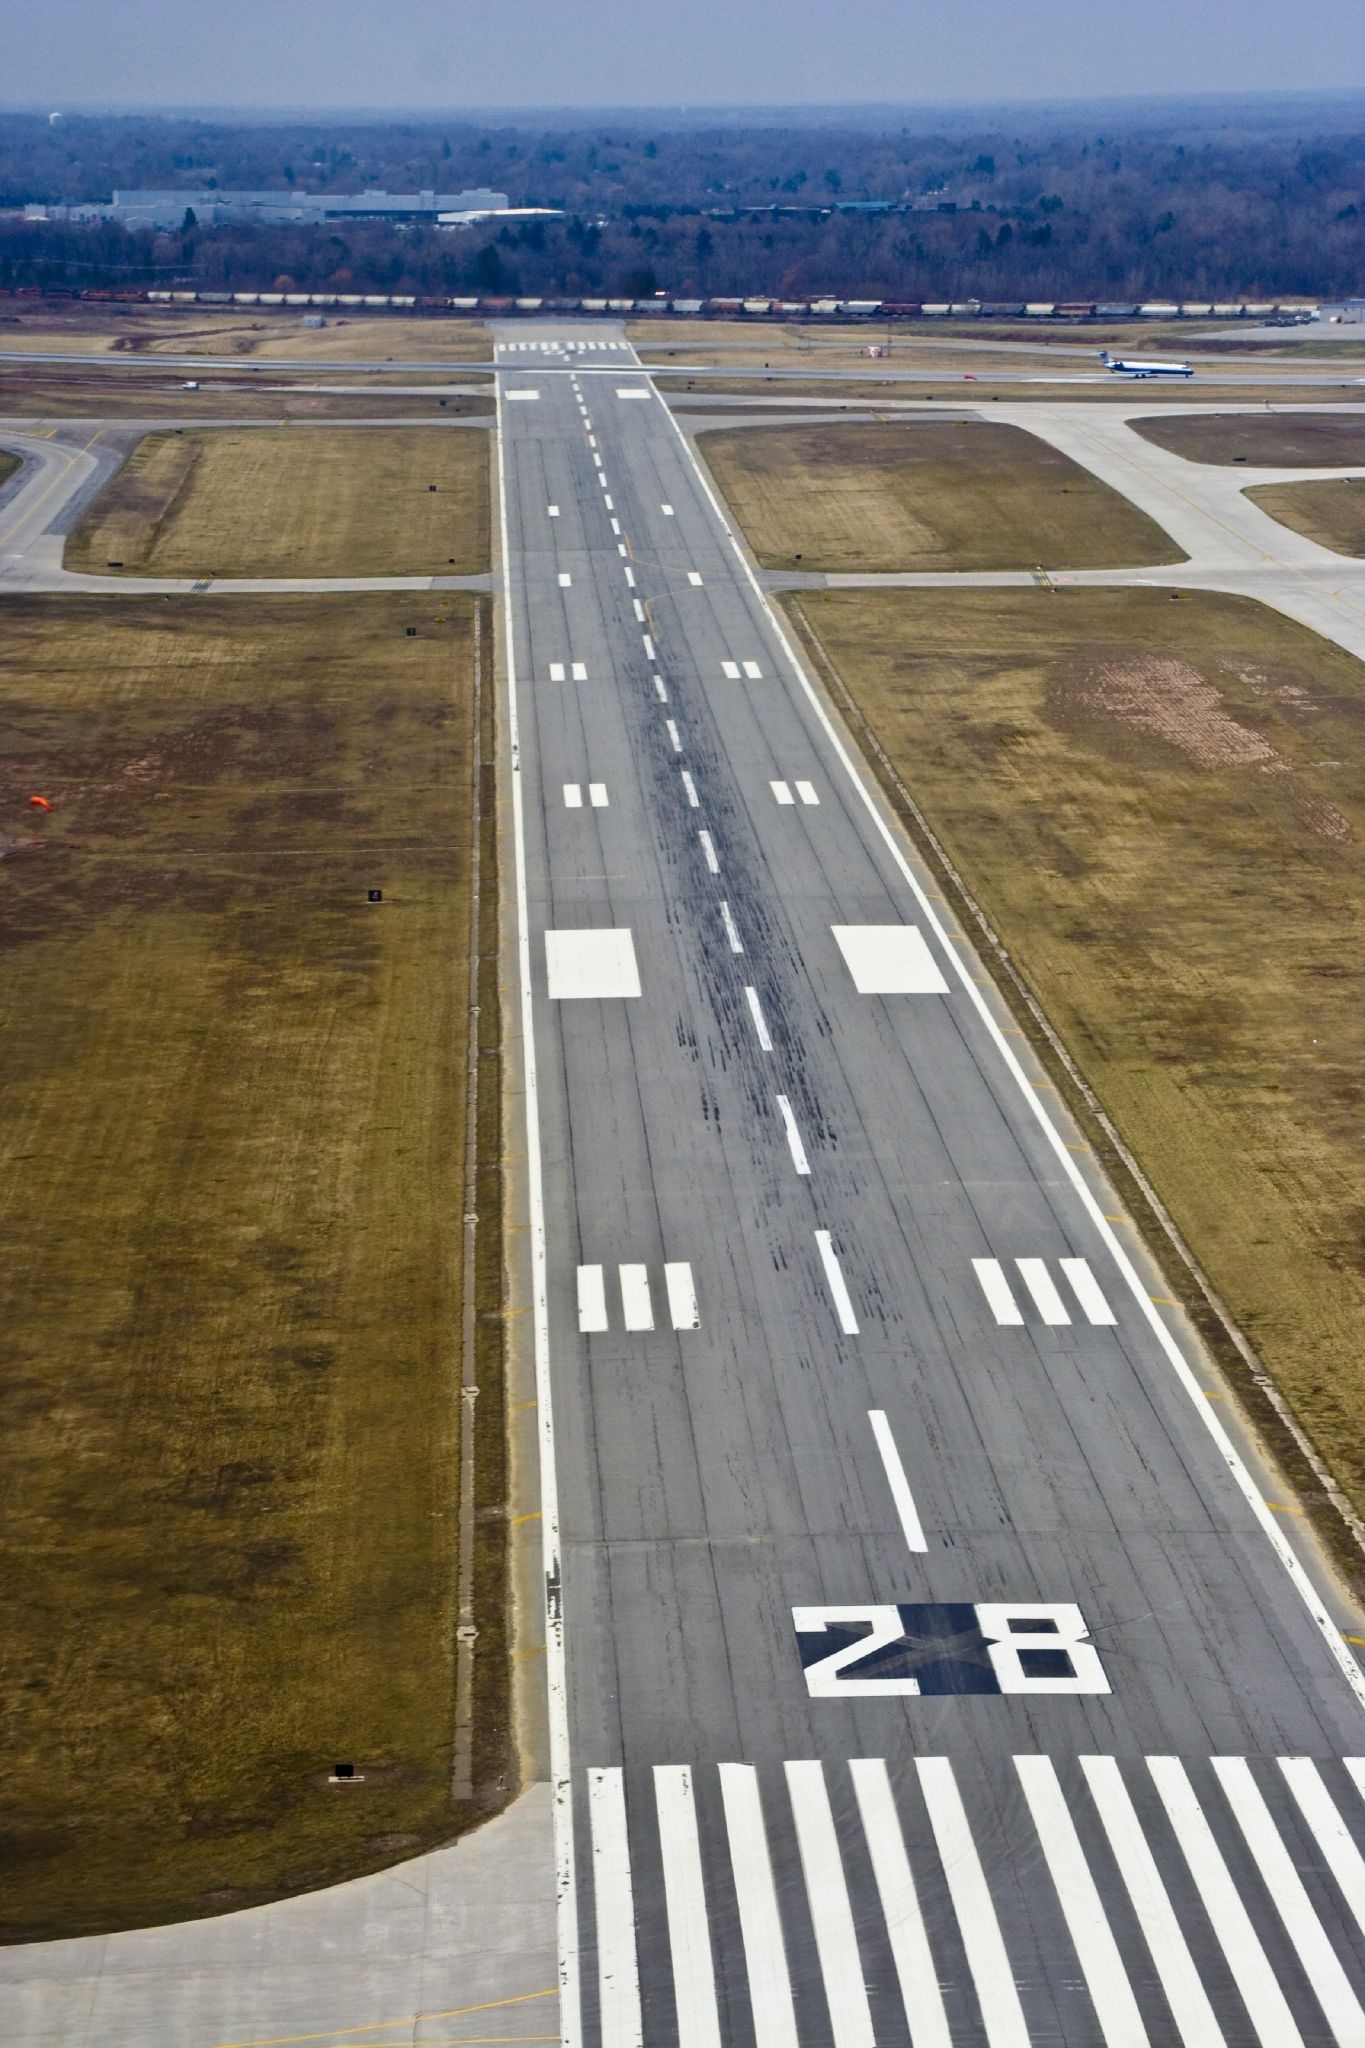 Airport Runway With Plane